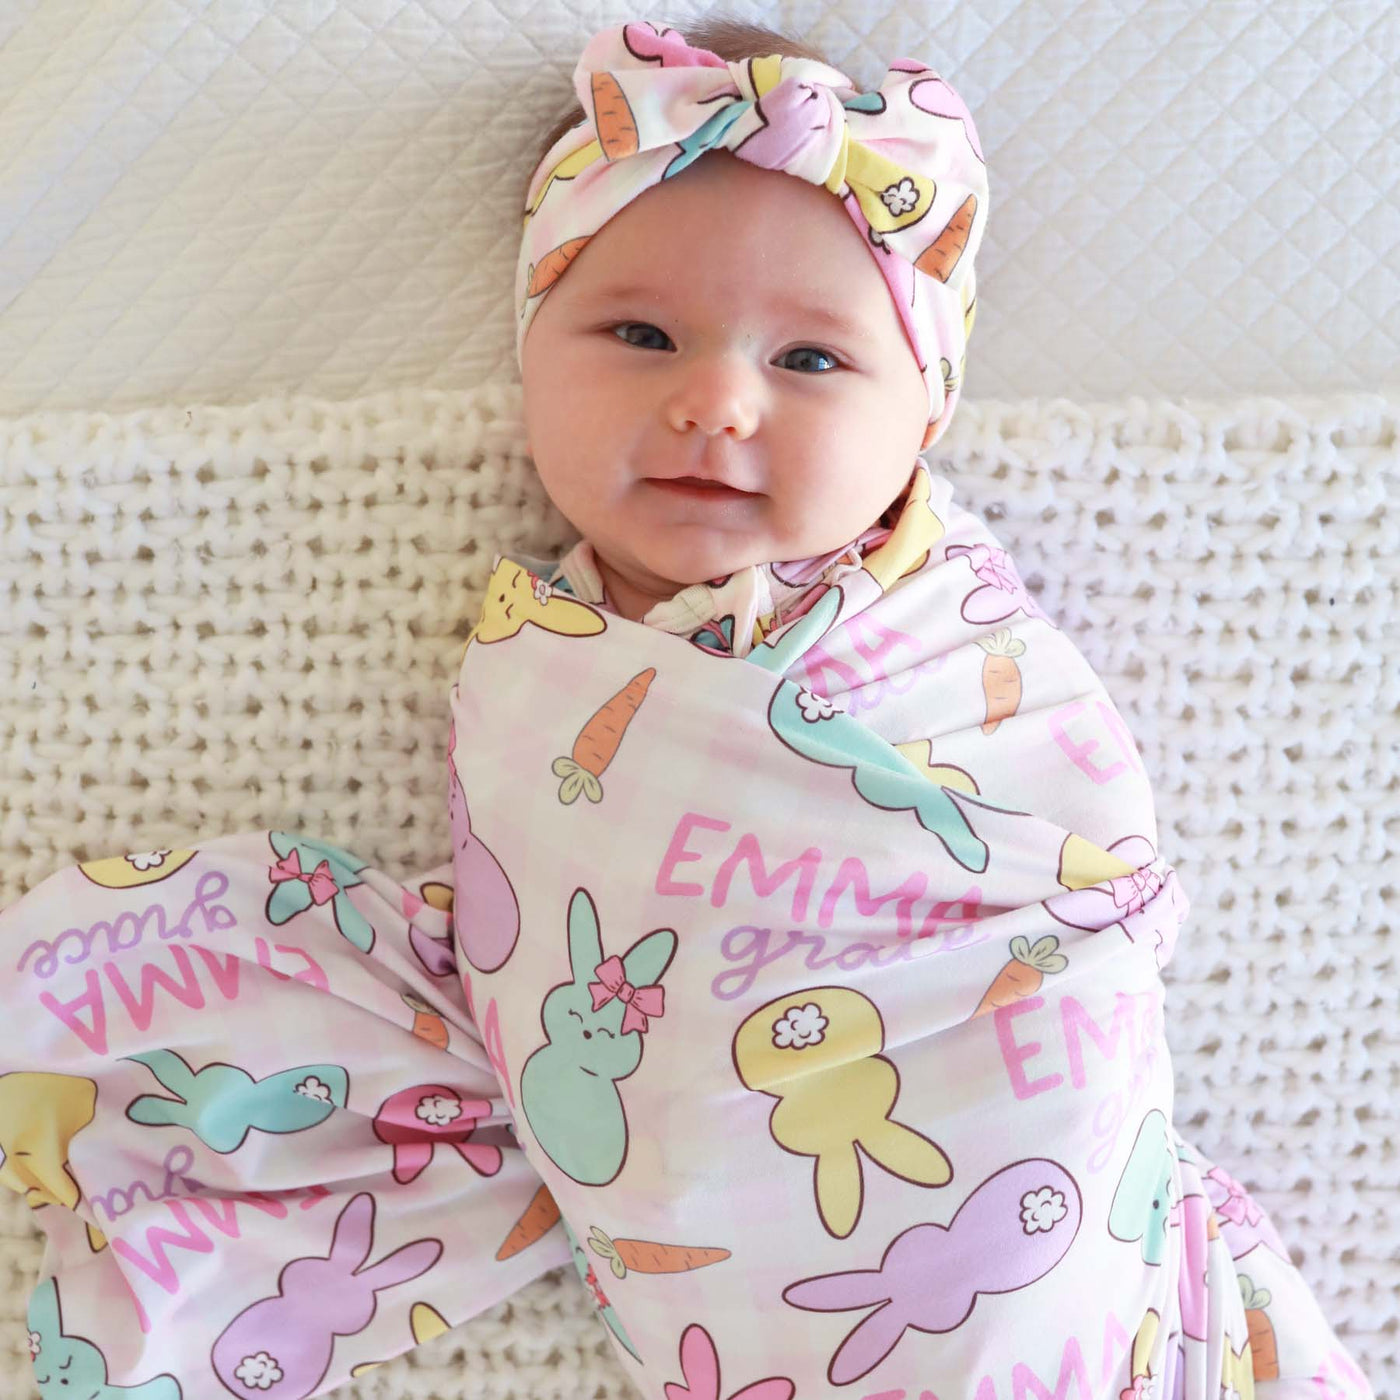 Snuggle Bunny Personalized Swaddle Blanket in Pink